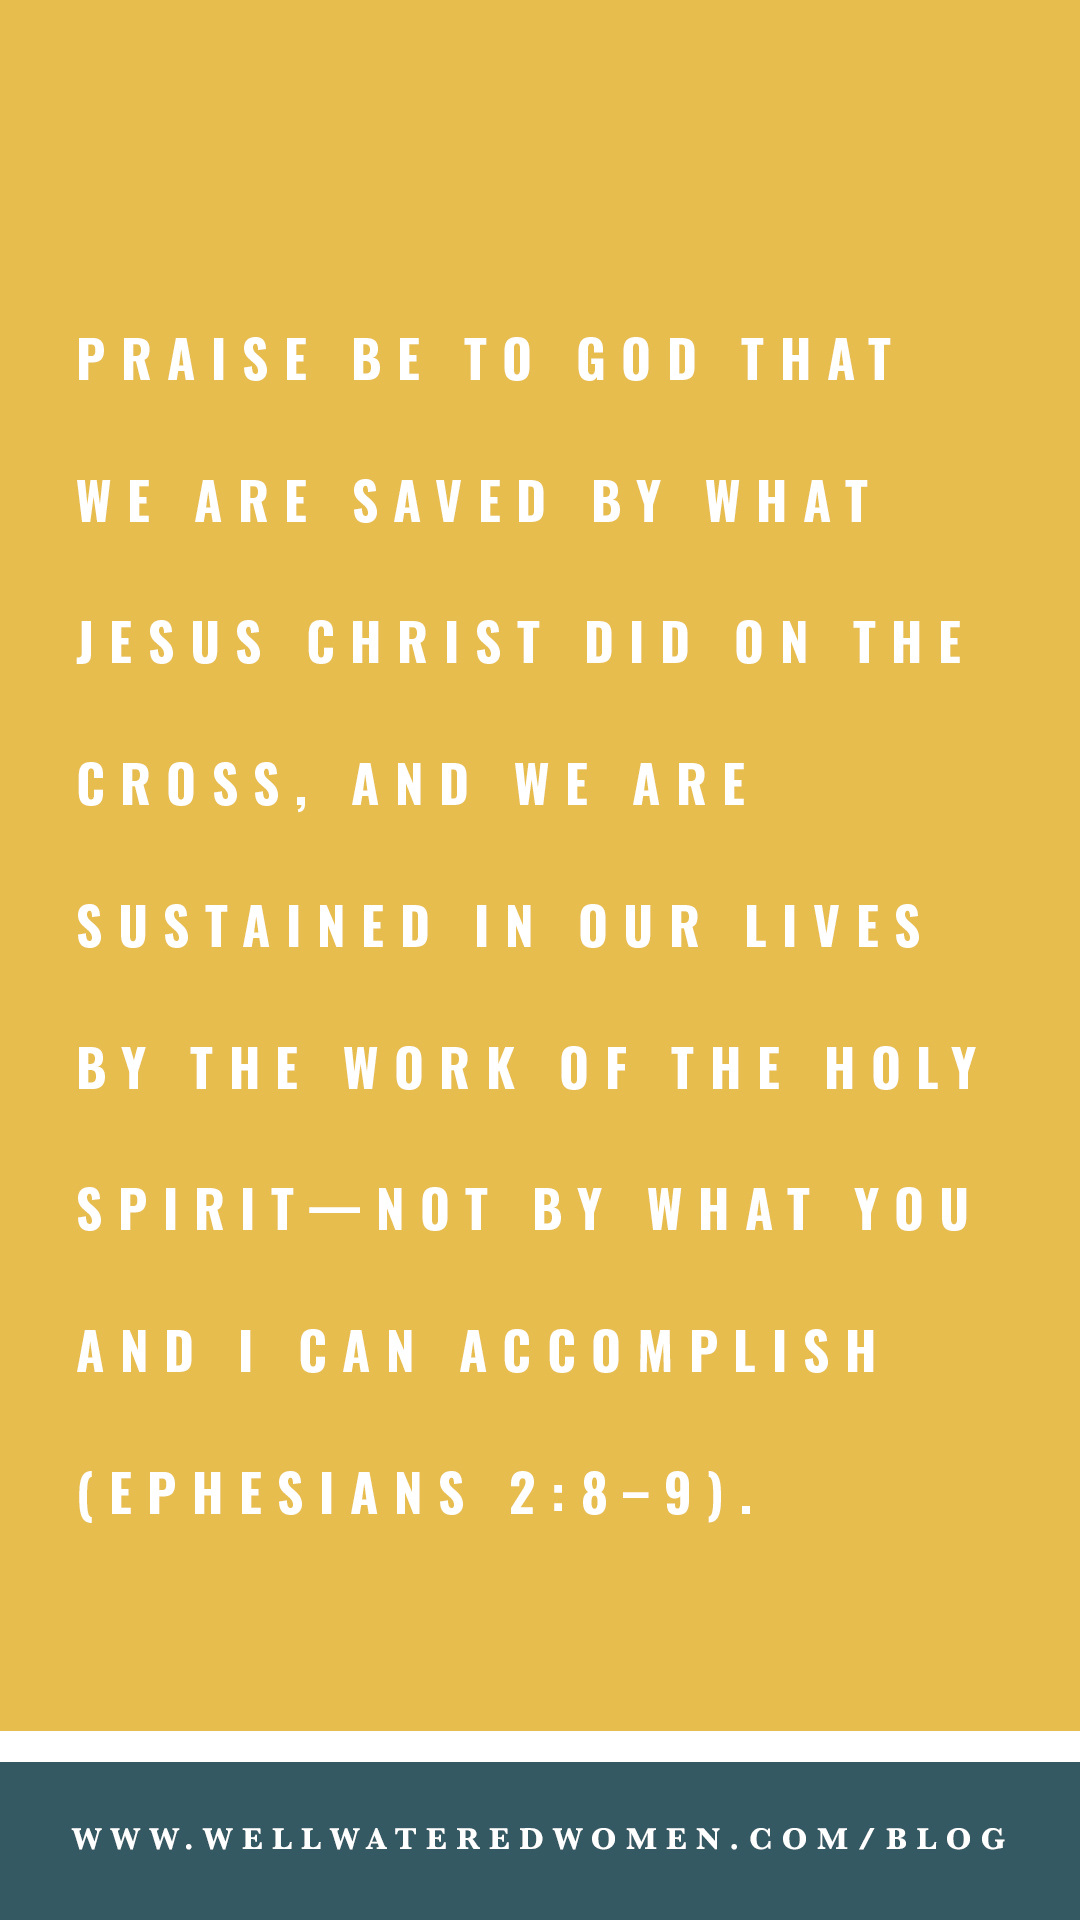 Praise be to God that we are saved by what Jesus Christ did on the cross, and we are sustained in our lives by the work of the Holy Spirit—not by what you and I can accomplish (Ephesians 2:8–9)!